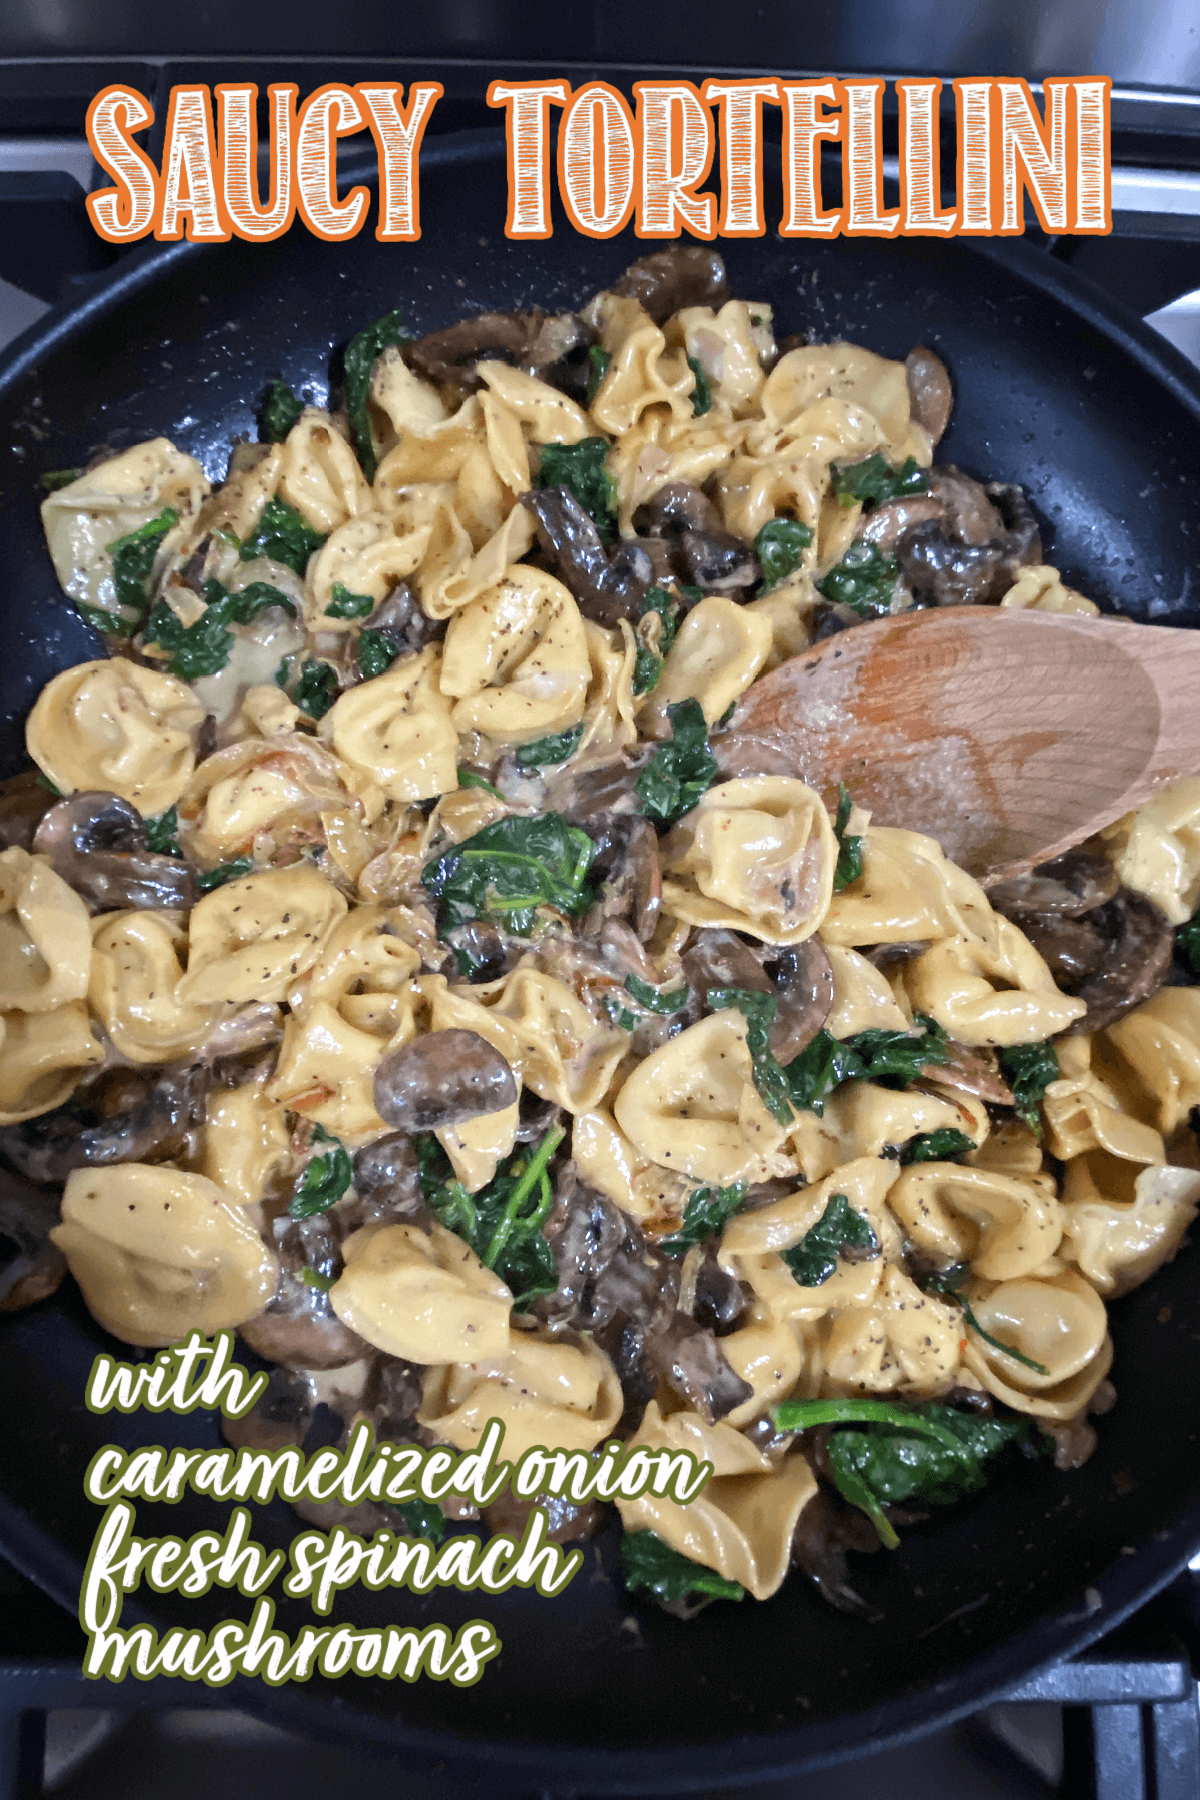 A saucy rich Italian pasta dish that is bursting with the flavor of earthy mushrooms and caramelized onions. Fresh spinach adds to the delicious meatless recipe. This is an easy dish to make for a weeknight dinner that the family will love. You can caramelize the onions ahead of time to make the recipe even faster. It is so delicious it is company worthy.